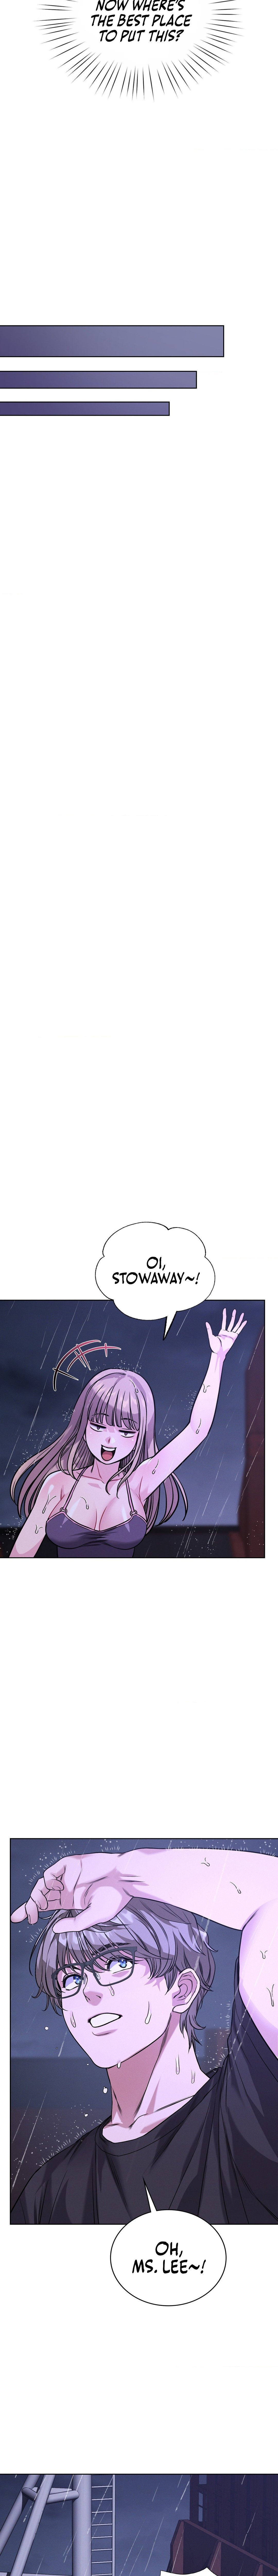 My Stowaway Diary - Chapter 8 Page 10